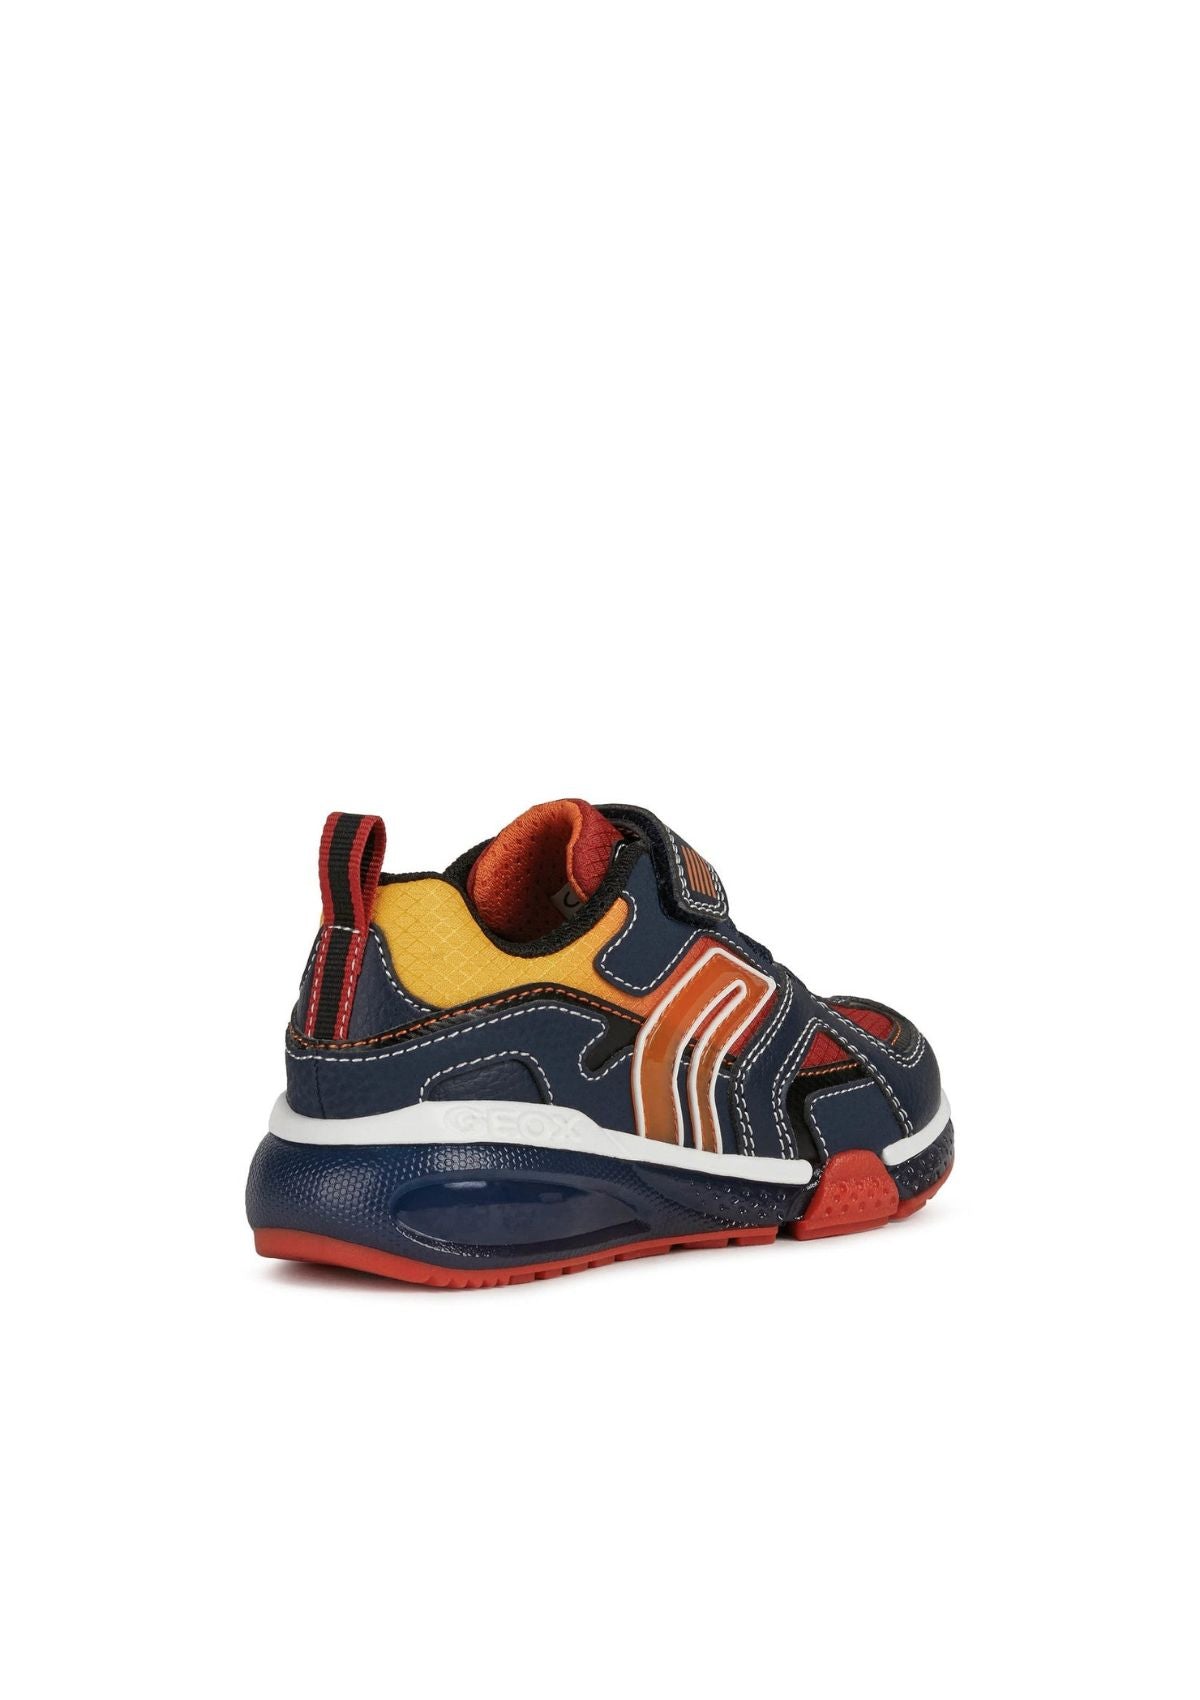 Geox Junior Boys Trainers BAYONYC Lights-Up Navy Red